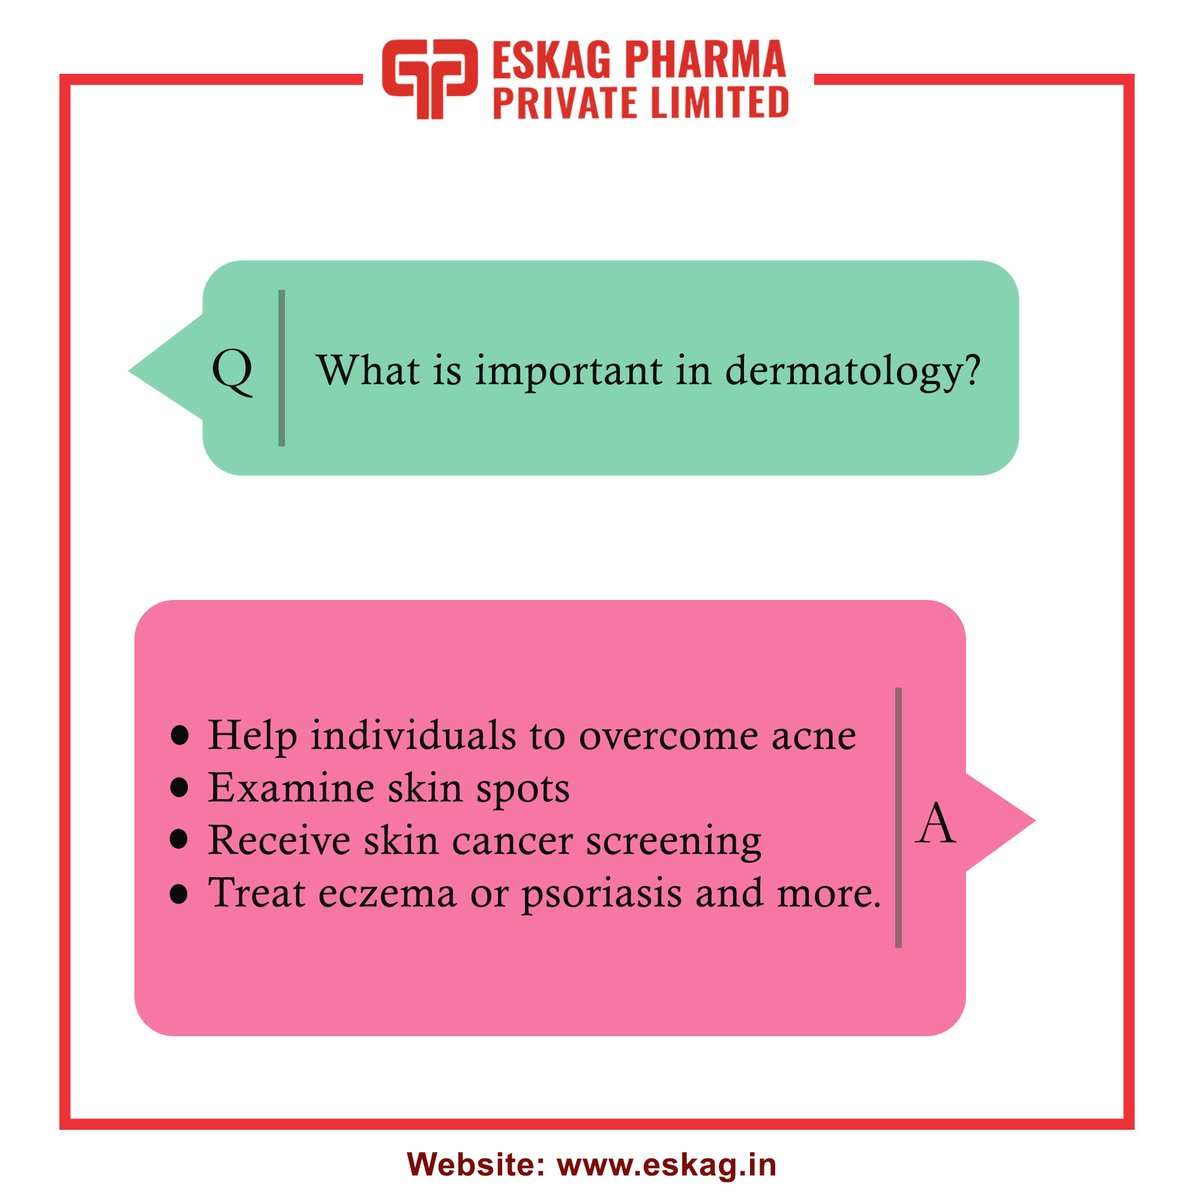 Ask anything you want to know.
#FAQ #askme #questionandanswer #SkincareEssentials #DermatologyCare #dermatologia #AskYourQuestion #AskMeAnything #HelpfulTips